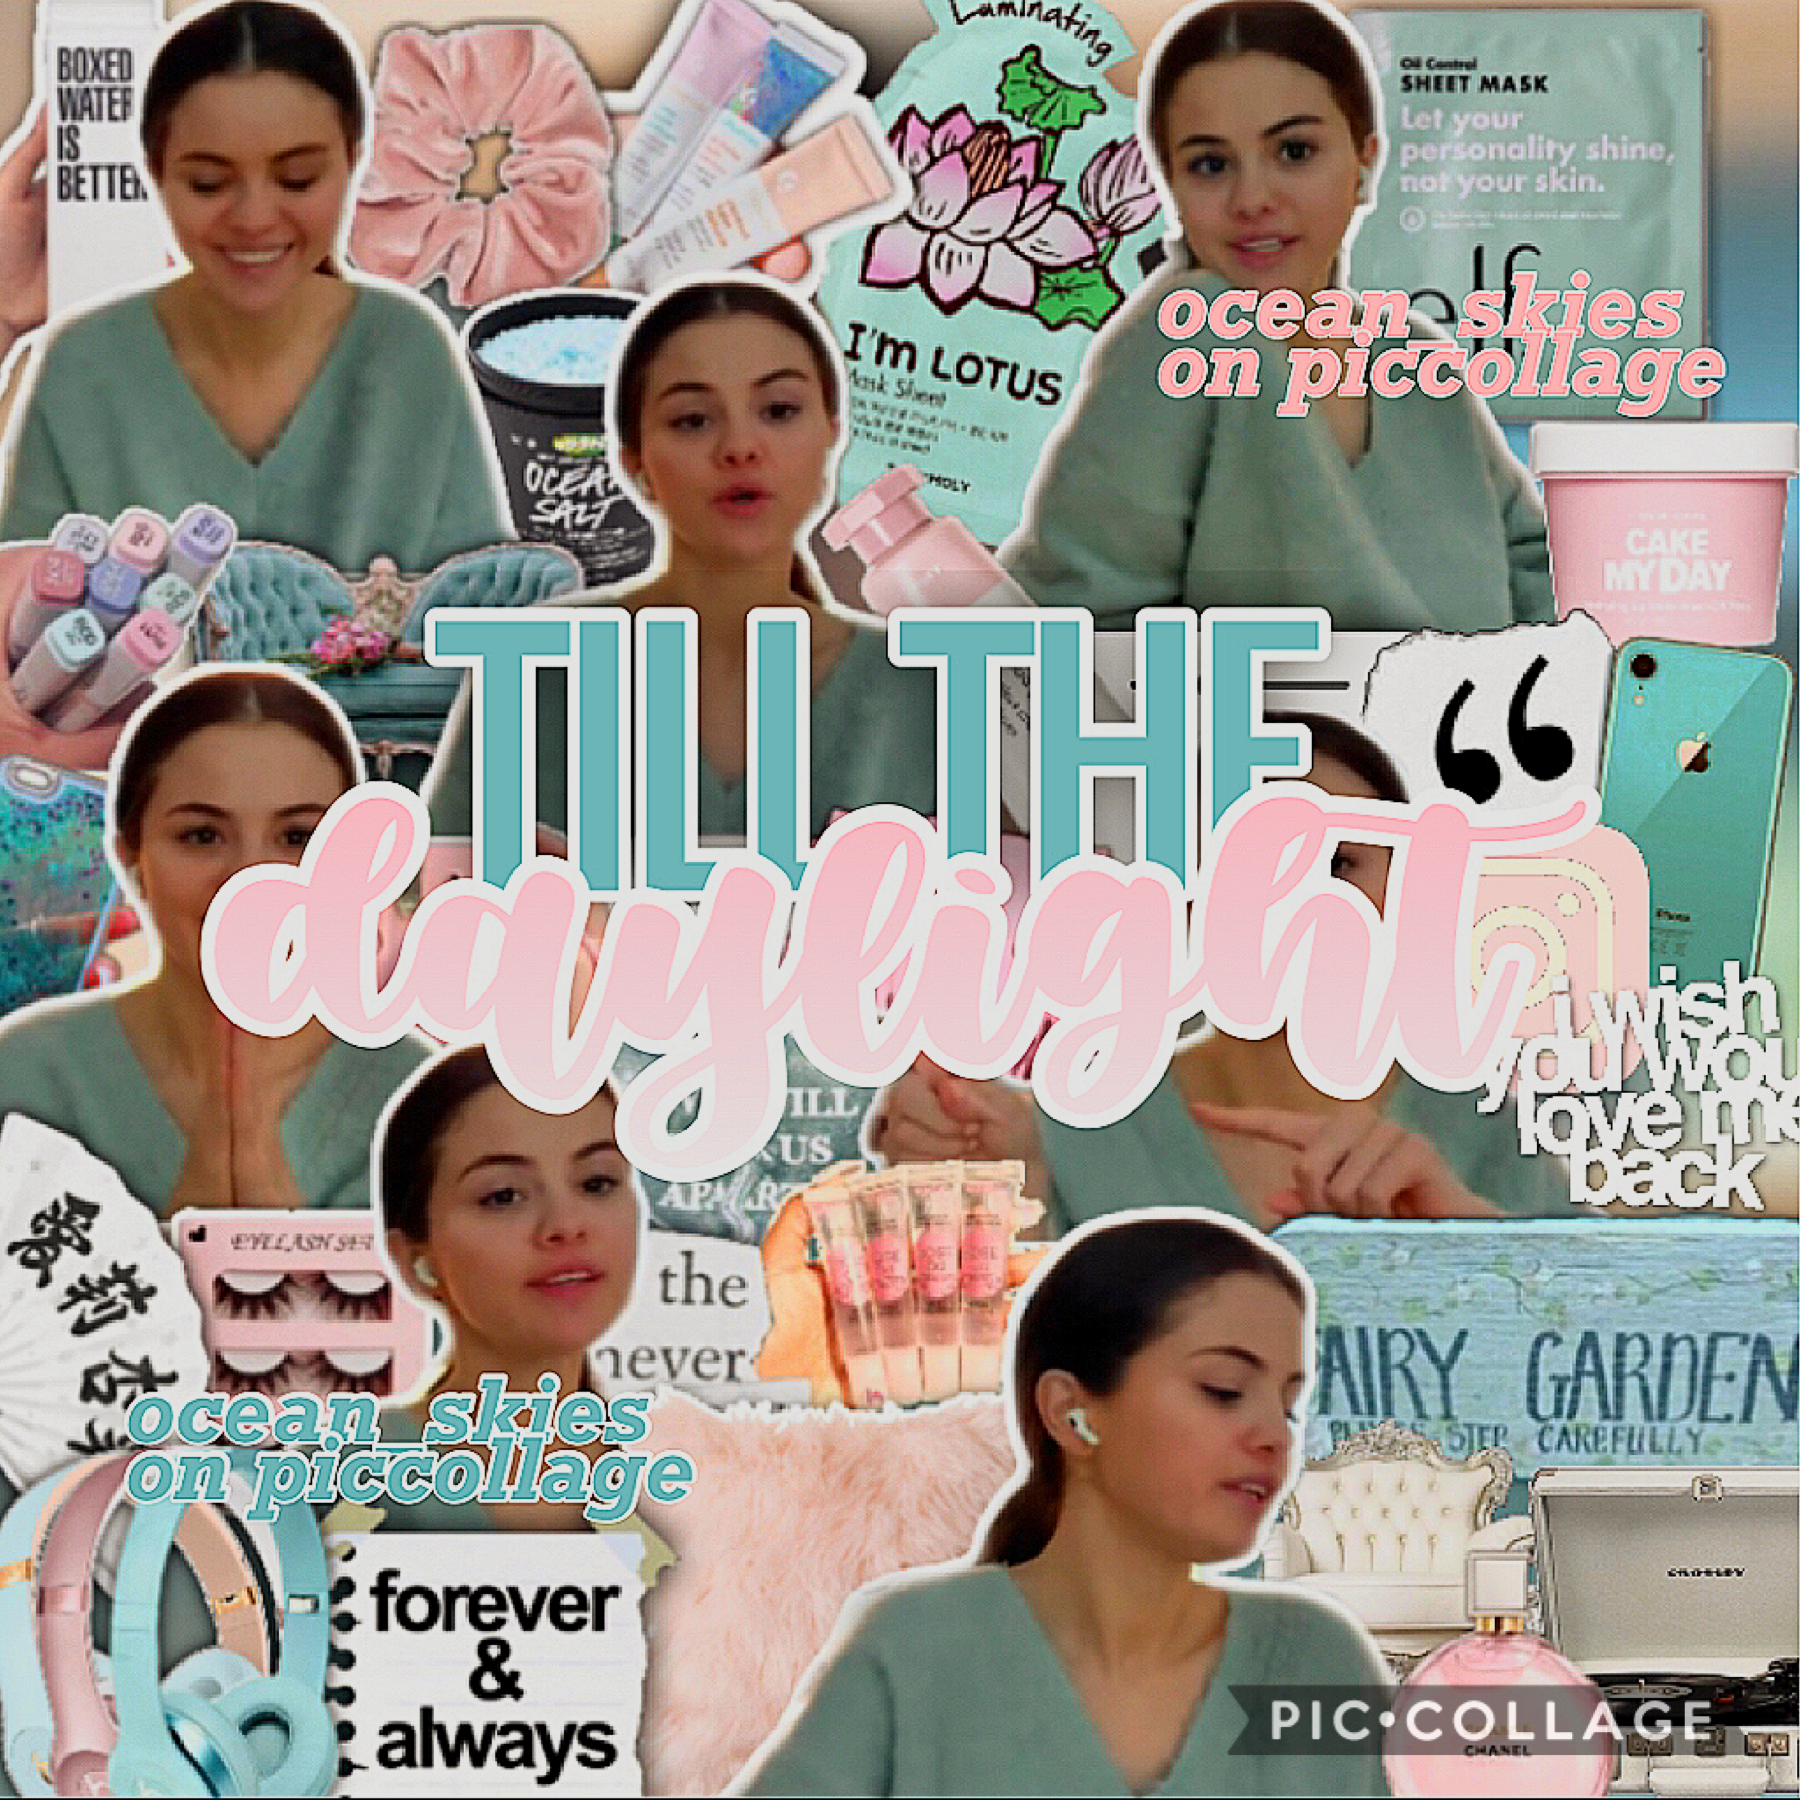 TAP
hiiiiii i started this edit a long long time ago but i finally finished it! how r u guys! i’m still active just not rly posting :p